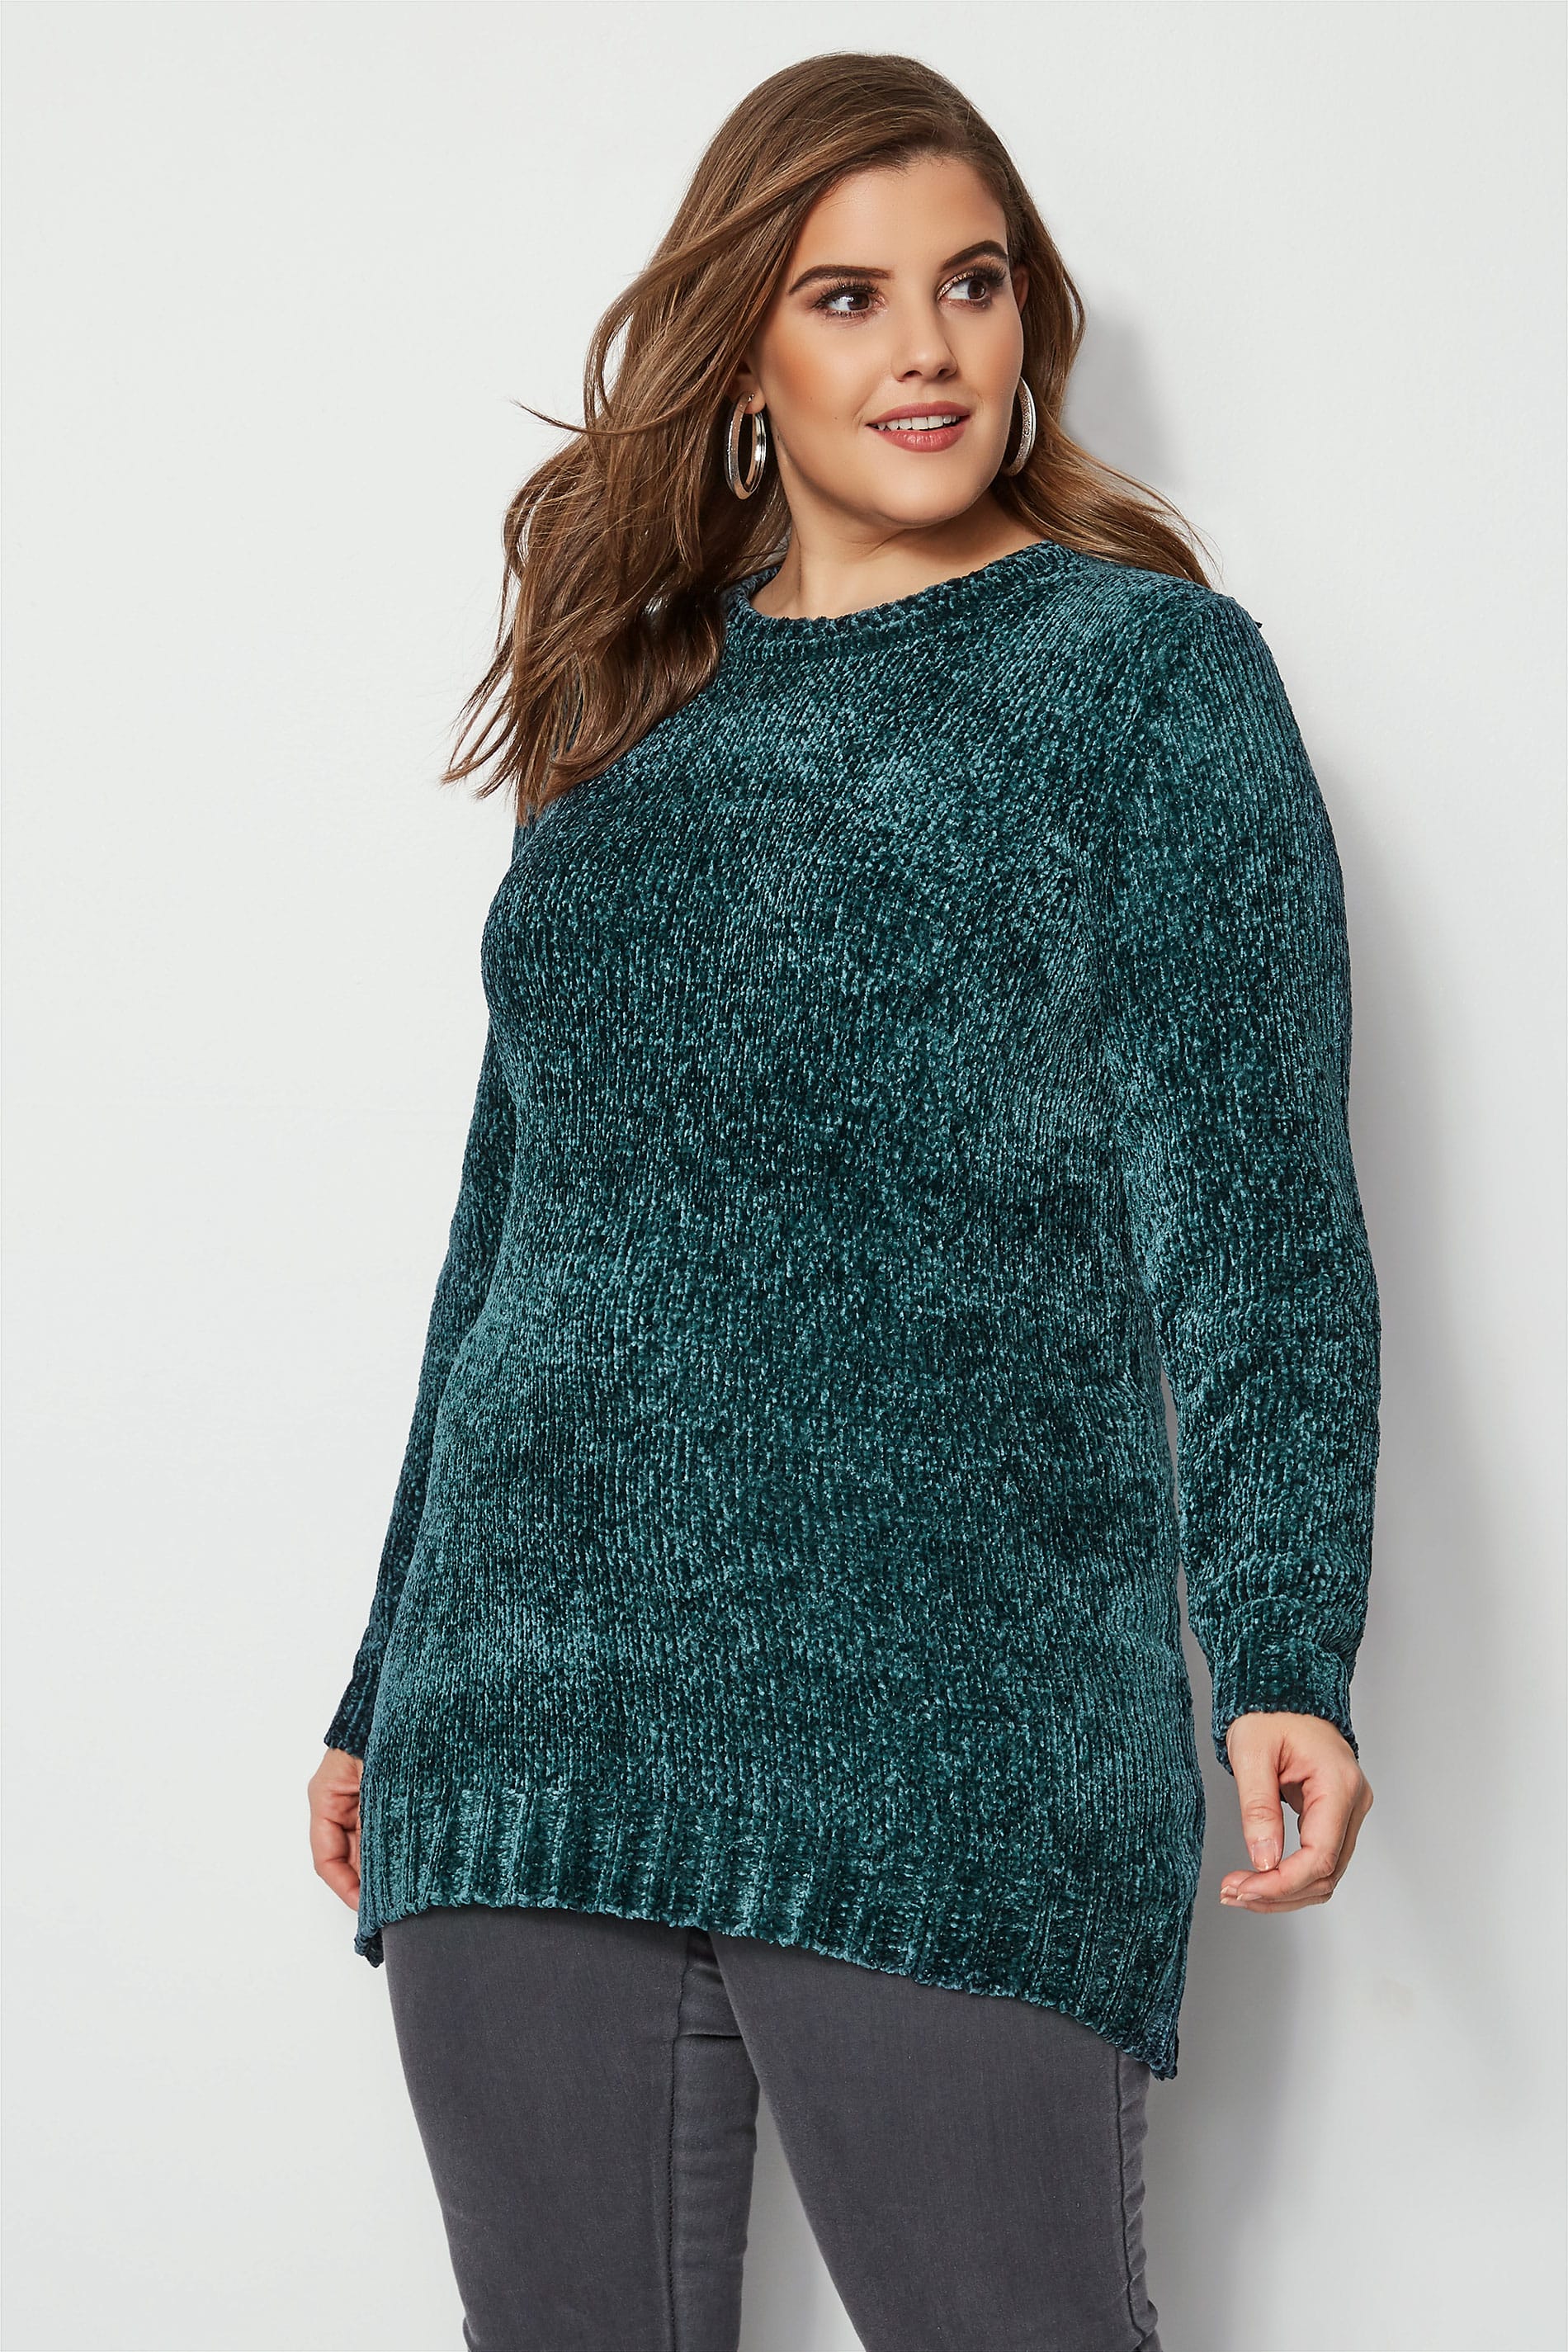 Dark Green Chenille Jumper, plus size 16 to 36 | Yours Clothing